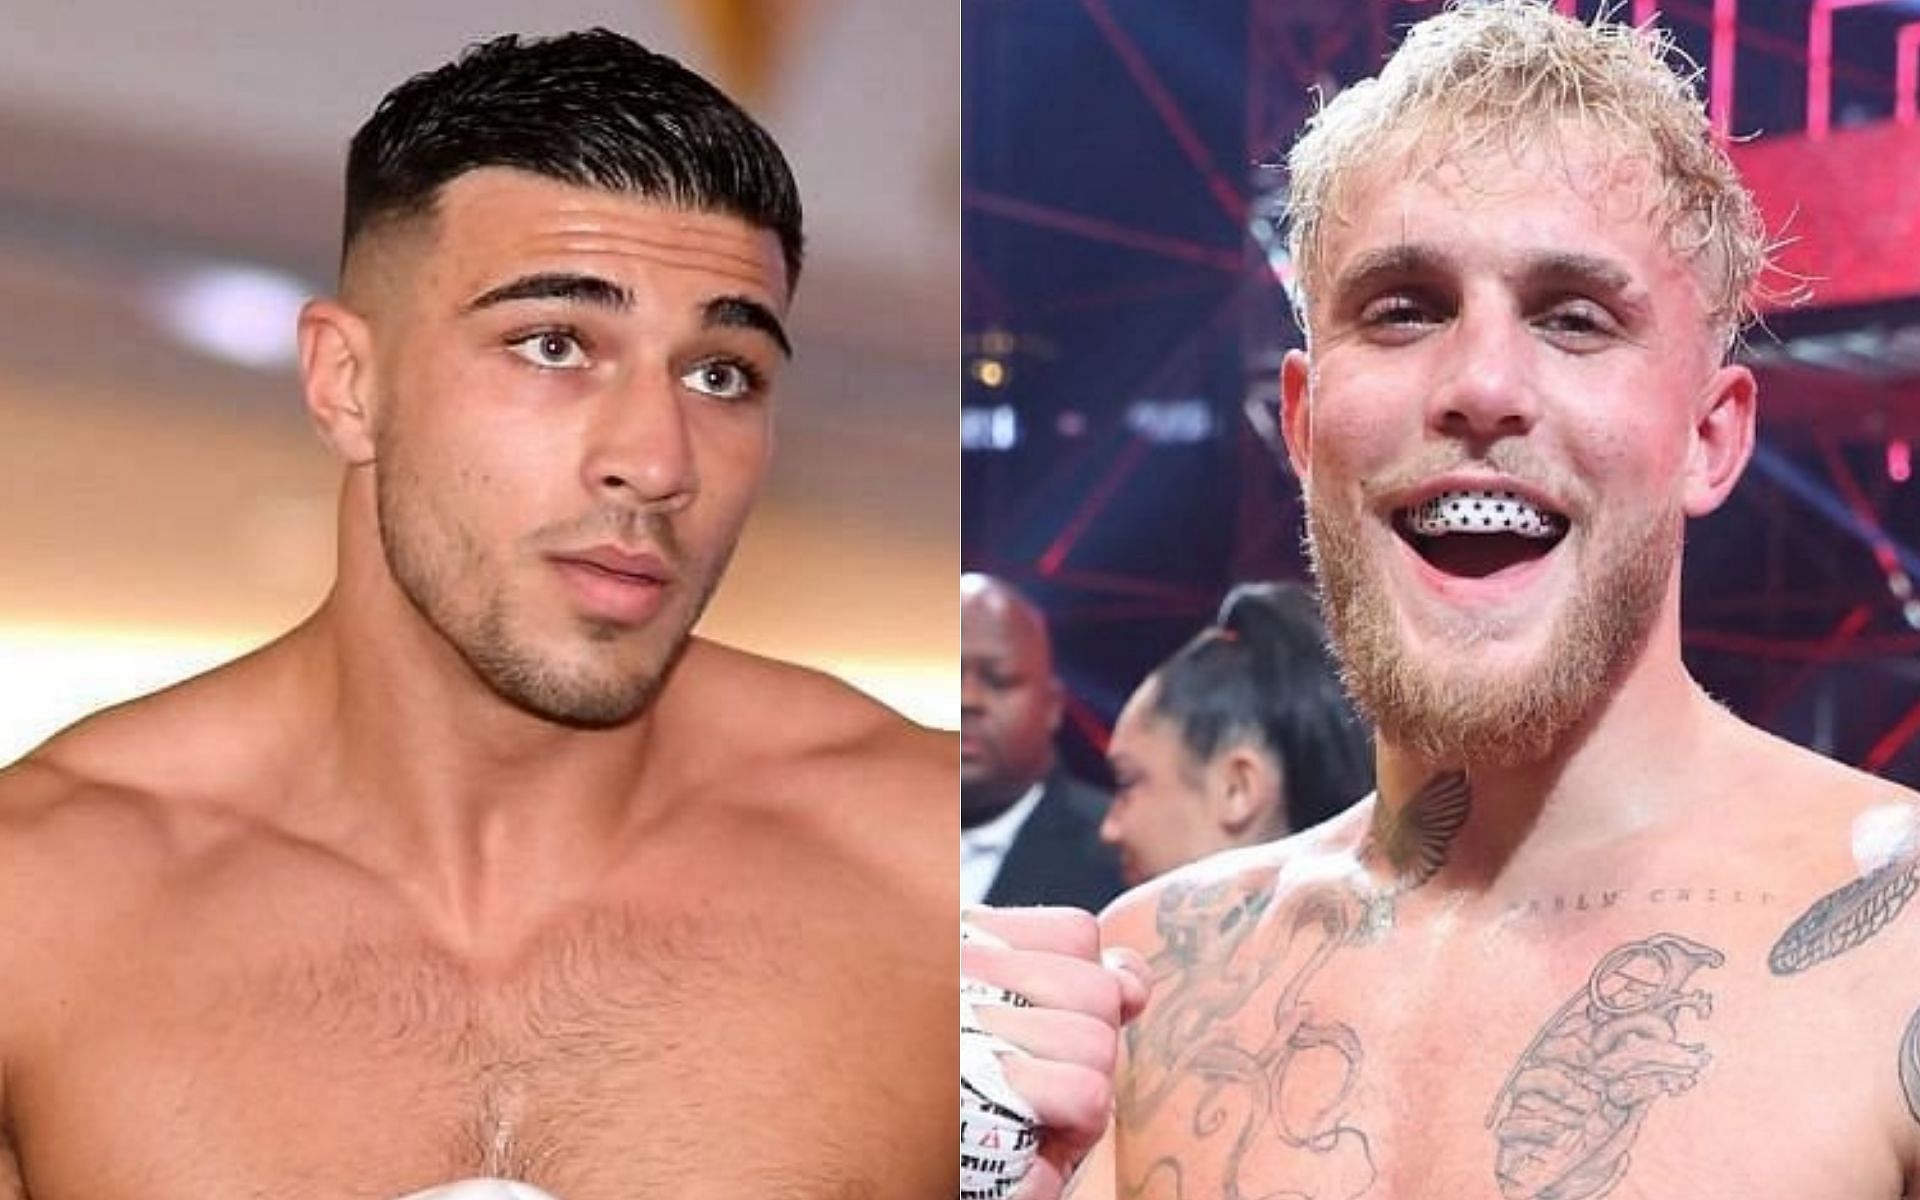 Tommy Fury (left) and Jake Paul (right)